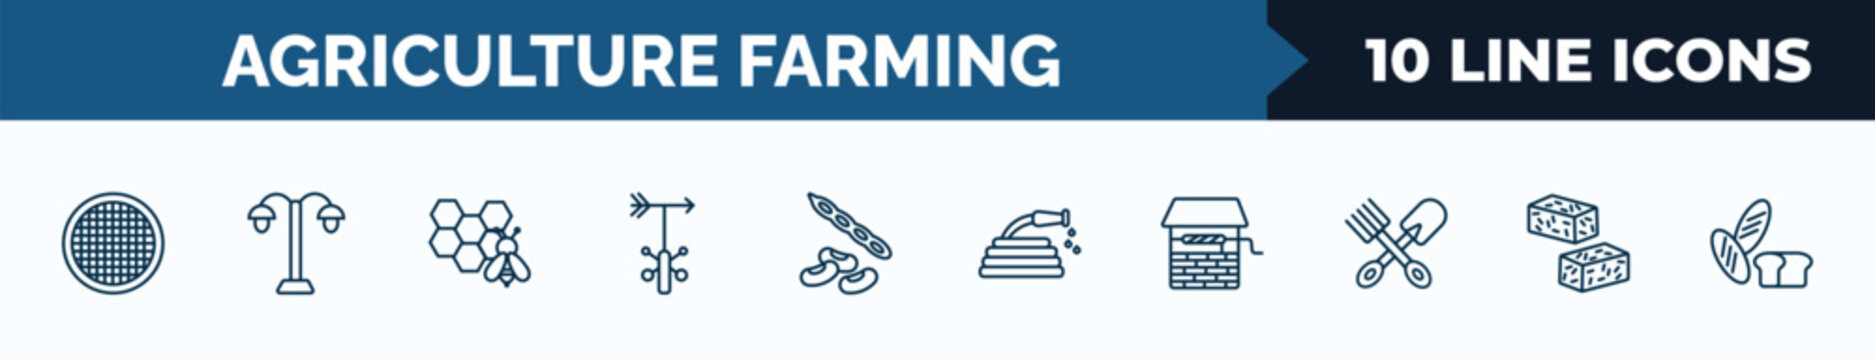 set of 10 agriculture farming web icons in outline style. thin line icons such as riddle tool, lamppost, honeycomb, weather vane, legume, hose, water well, bale of hay vector illustration.